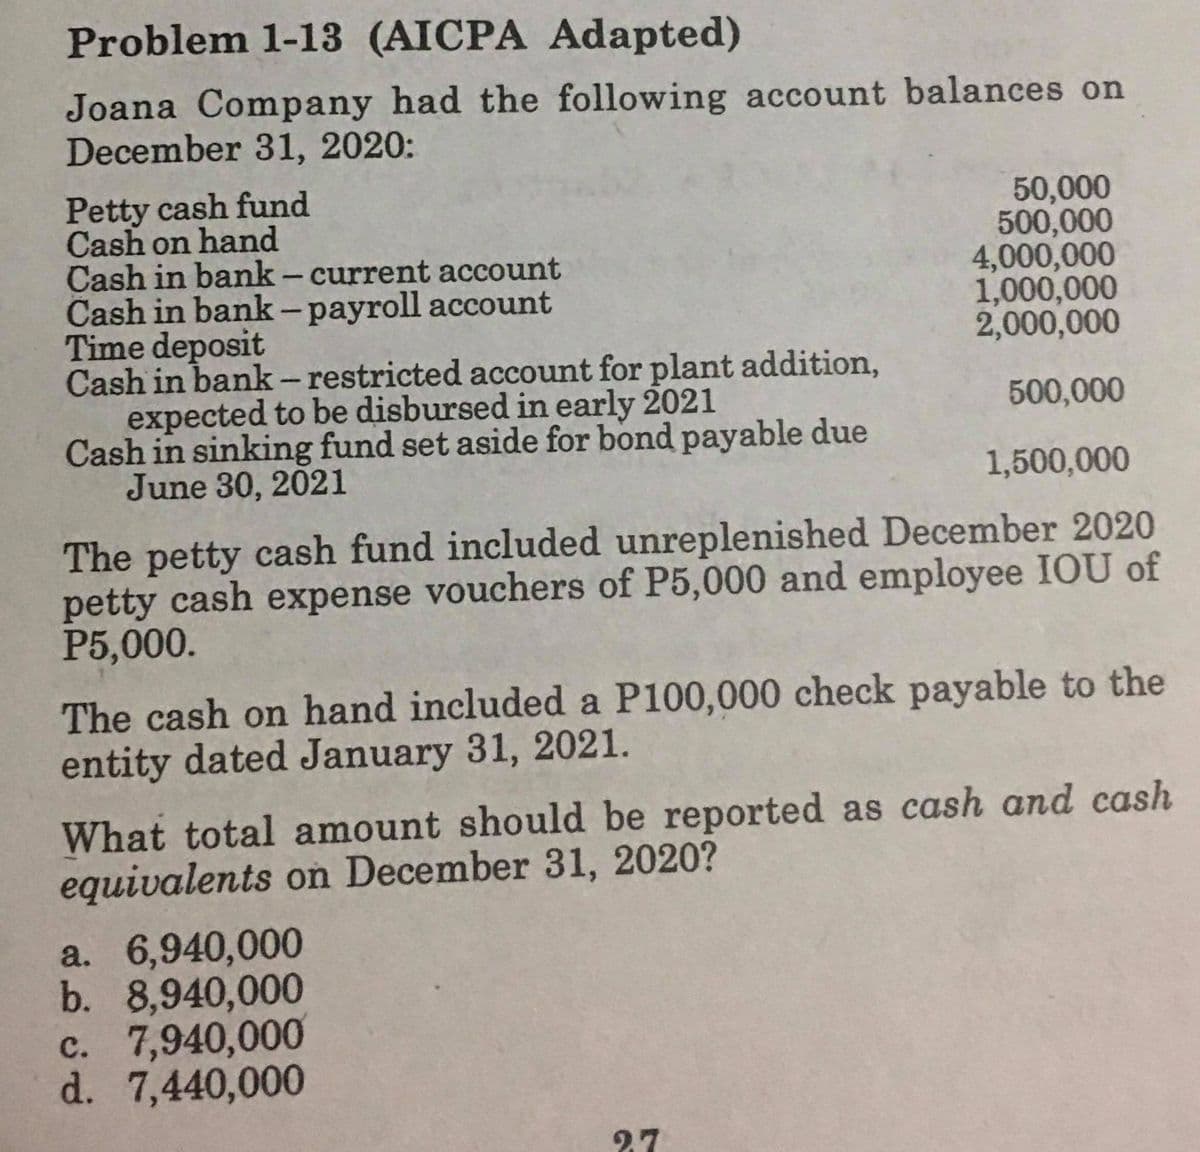 Problem 1-13 (AICPA Adapted)
Joana Company had the following account balances on
December 31, 2020:
Petty cash fund
Cash on hand
Cash in bank- current account
Cash in bank -payroll account
Time deposit
Cash in bank - restricted account for plant addition,
expected to be disbursed in early 2021
Cash in sinking fund set aside for bond payable due
June 30, 2021
50,000
500,000
4,000,000
1,000,000
2,000,000
|
500,000
1,500,000
The petty cash fund included unreplenished December 2020
petty cash expense vouchers of P5,000 and employee IOU of
P5,000.
The cash on hand included a P100,000 check payable to the
entity dated January 31, 2021.
What total amount should be reported as cash and cash
equivalents on December 31, 2020?
a. 6,940,000
b. 8,940,000
c. 7,940,000
d. 7,440,000
27
